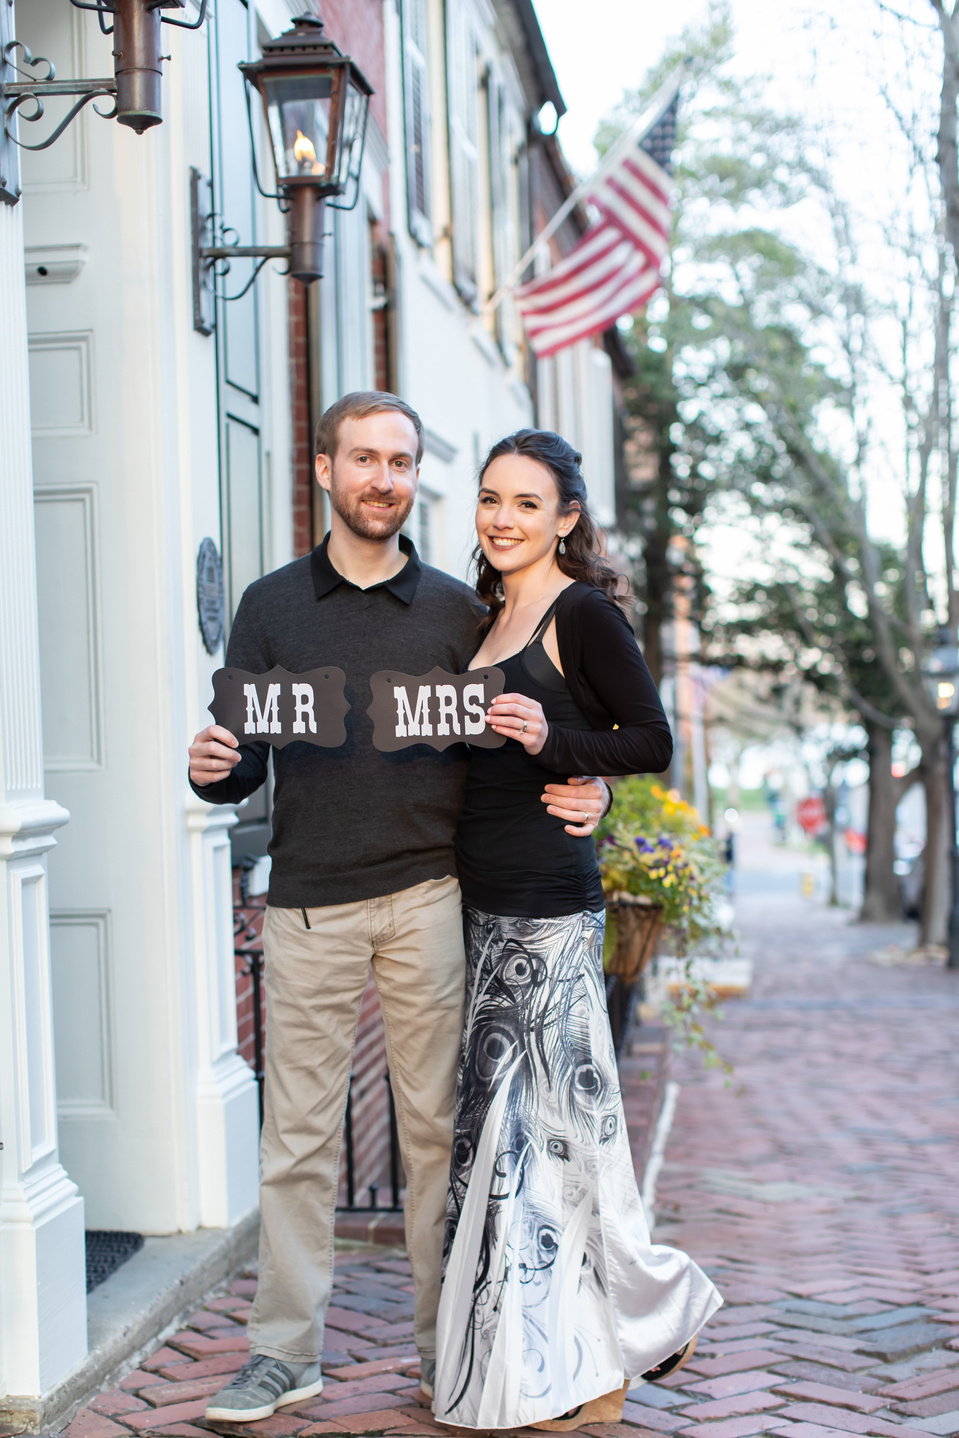 Newly wed couple on an historic street holding signs reading "Mr" and "Mrs"